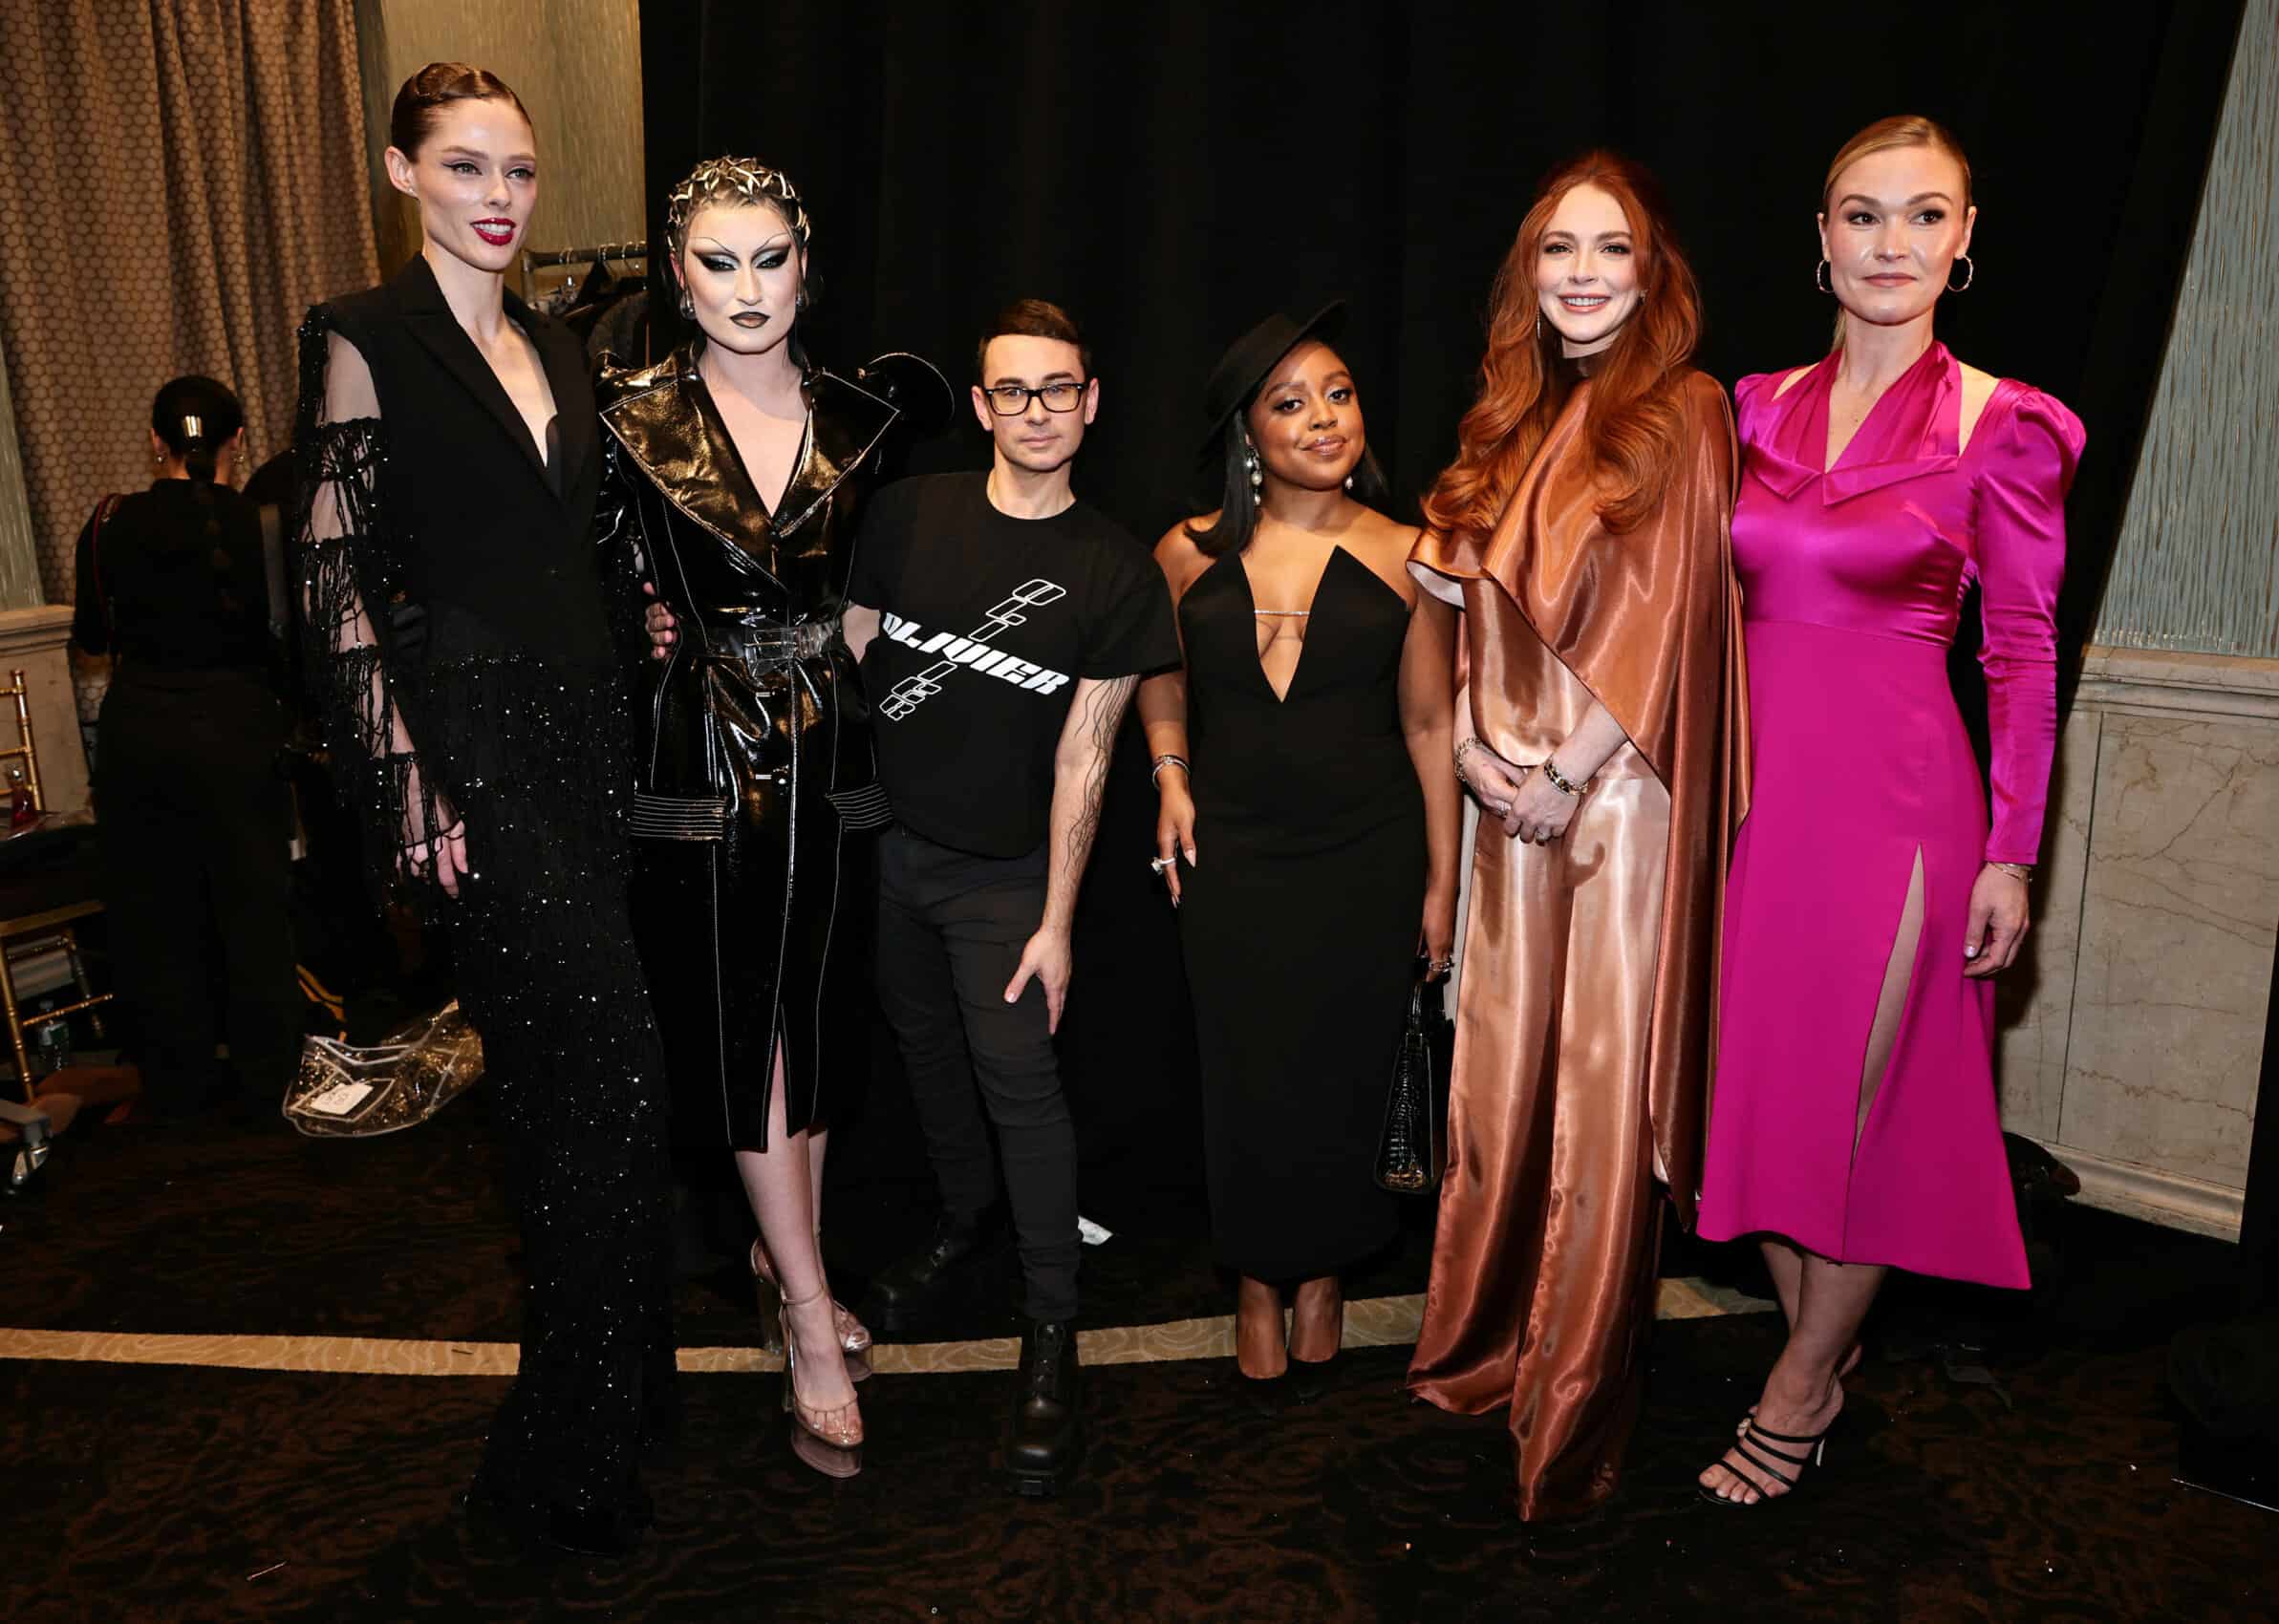 Siriano’s Front Row, Viktor&Rolf Arrive To Make NYC Smell Good, Cocktails With Mytheresa , Irina & Kendall For Marc Jacobs, And More!